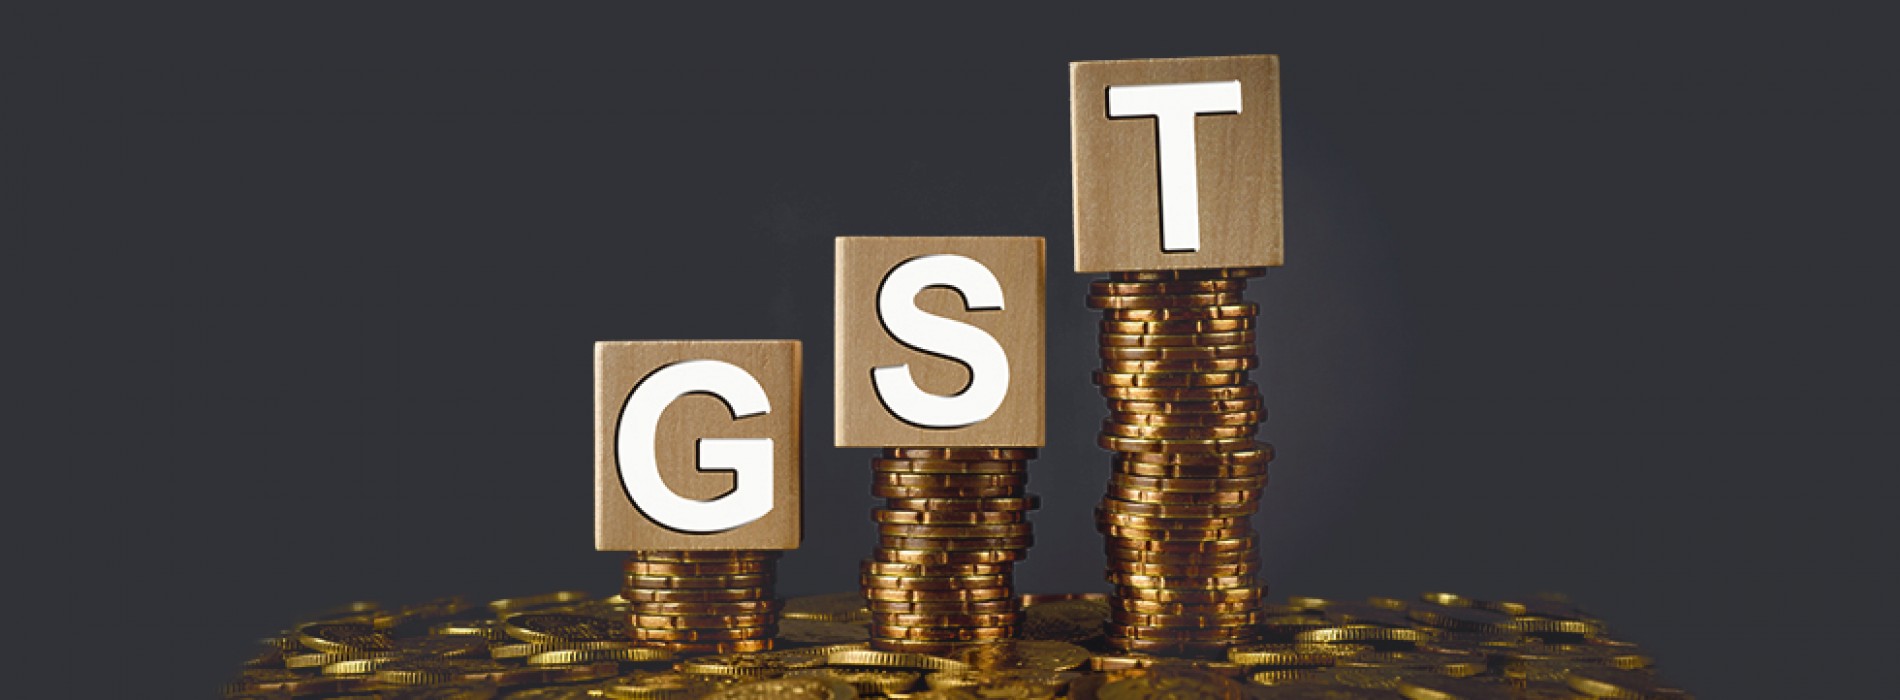 The Hospitality Industry disappointed over the GST rates for hotels & restaurants